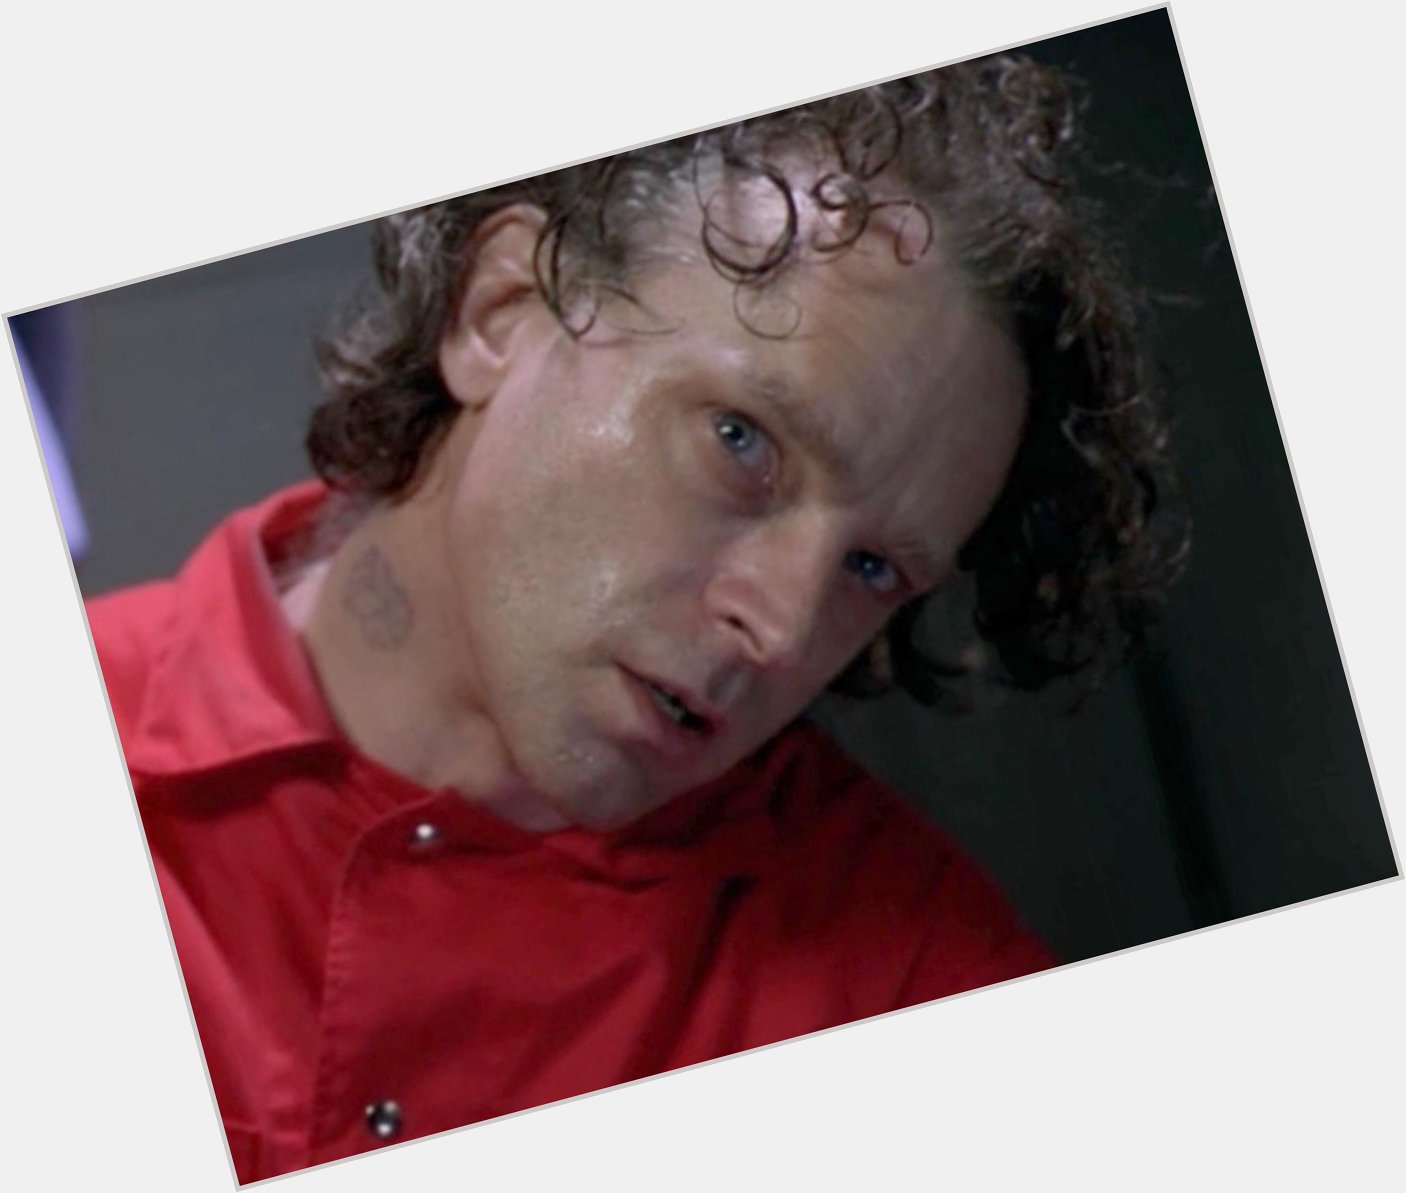 Happy to the fabulous Brad Dourif who among his numerous memorable roles was Luther Lee Boggs 